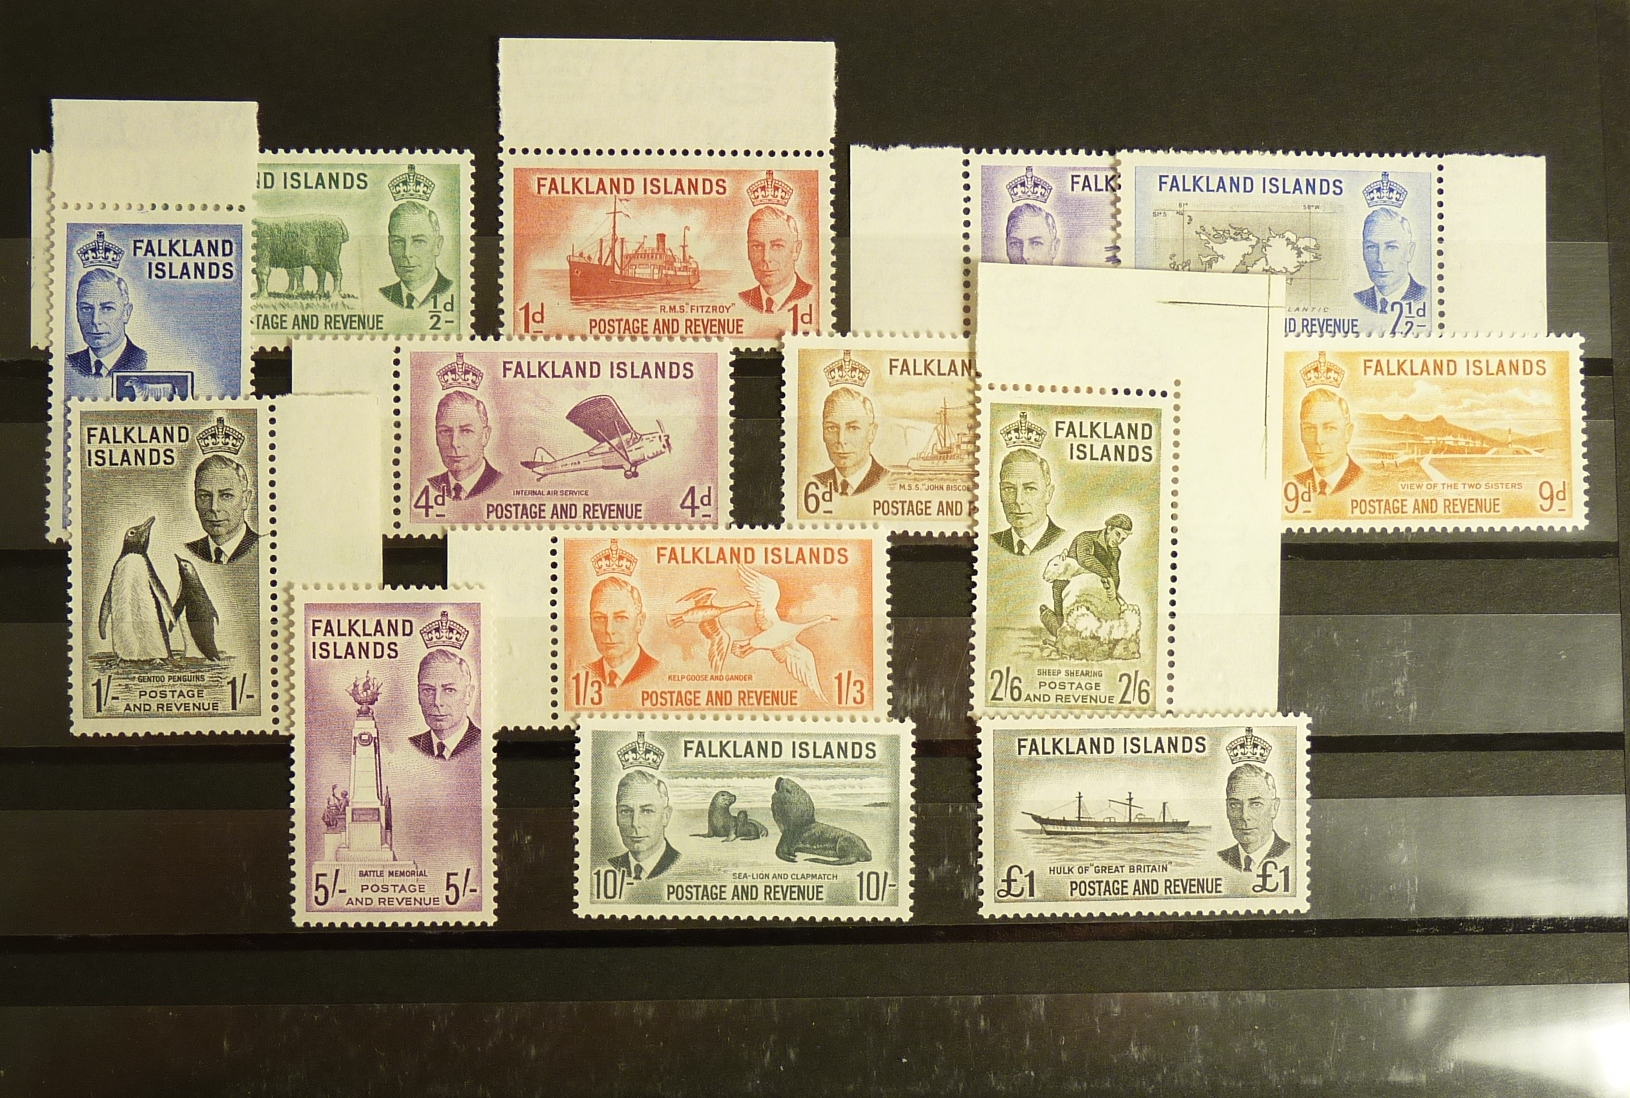 FALKLAND ISLANDS: 1952 ½d to £1, S.G.172-185, set of 14, mint - unmounted. Catalogue 2013 £180